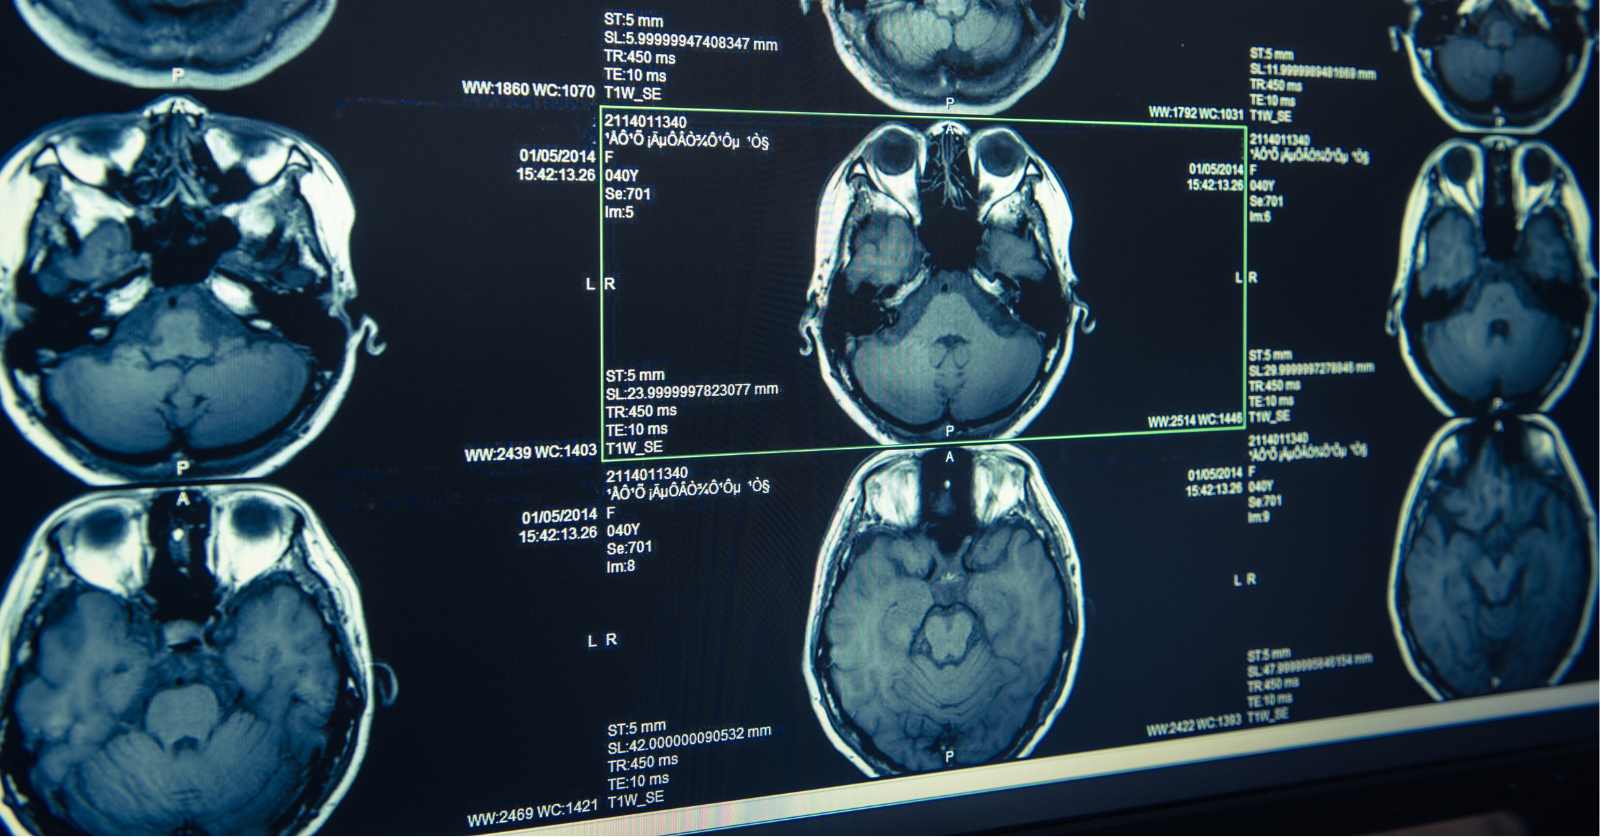 Ultrasound technology and brain implants offer new hope for those battling addiction